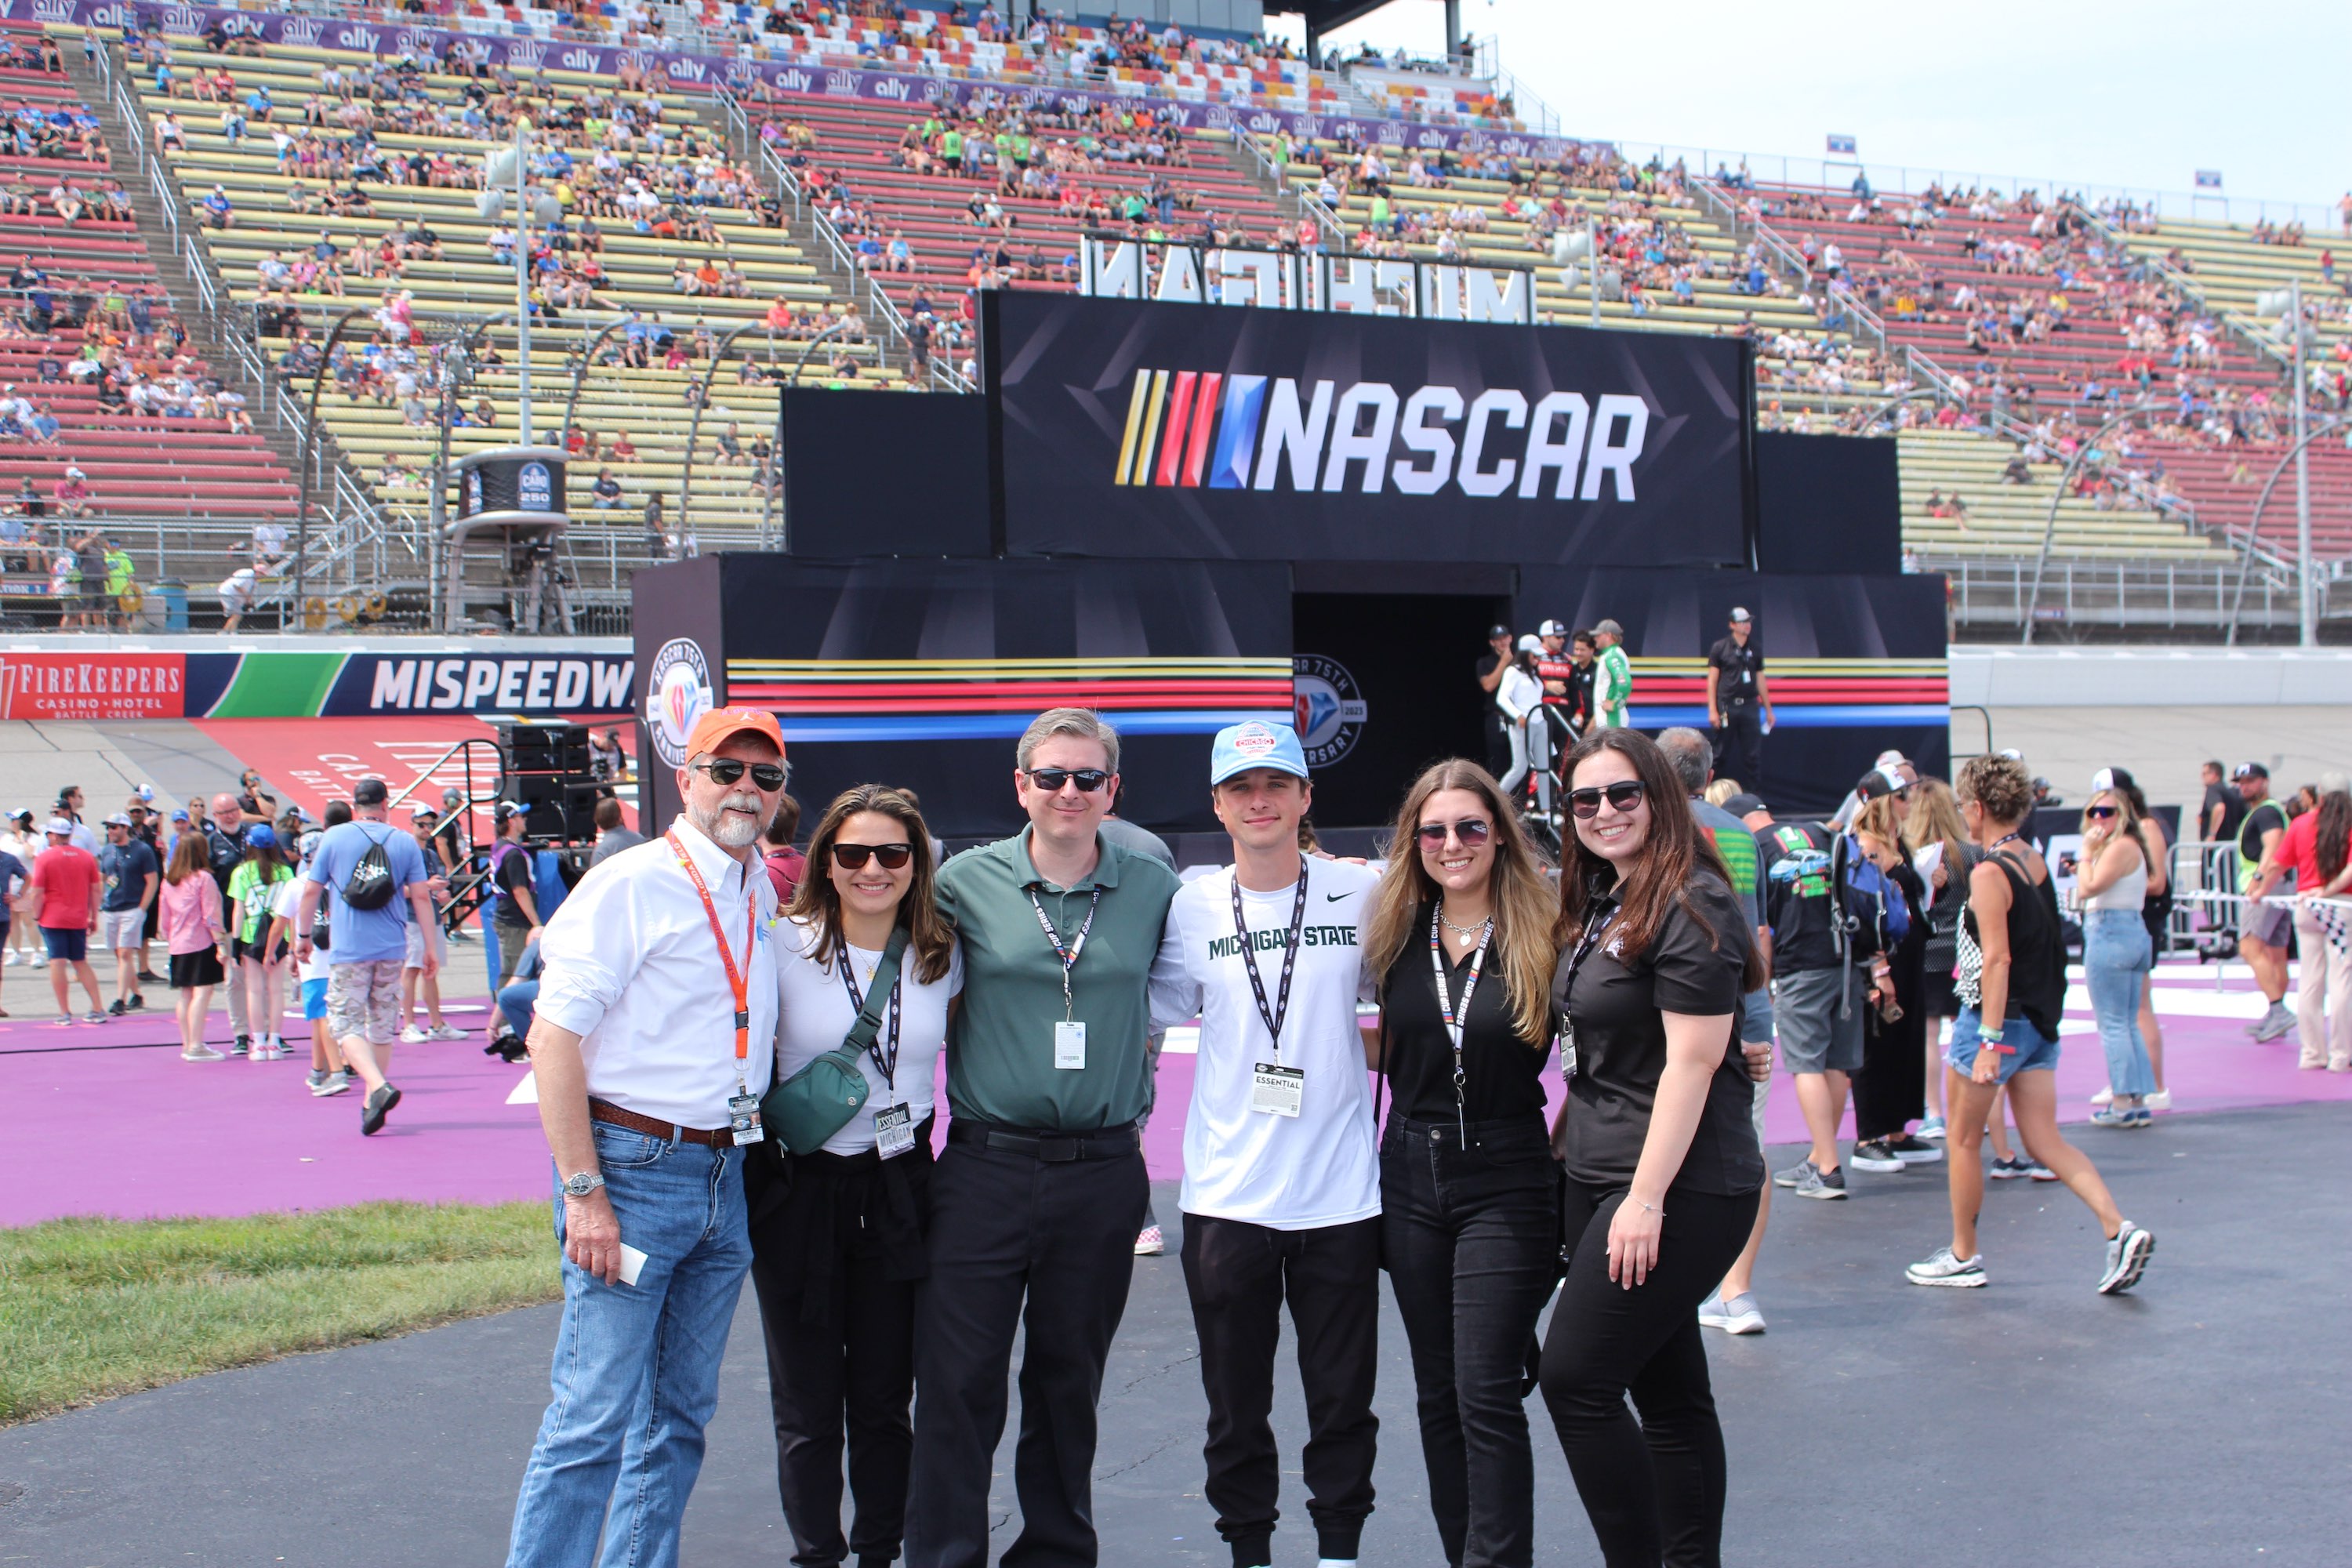 A group of MSU researchers pose at a NASCAR race, on the infield